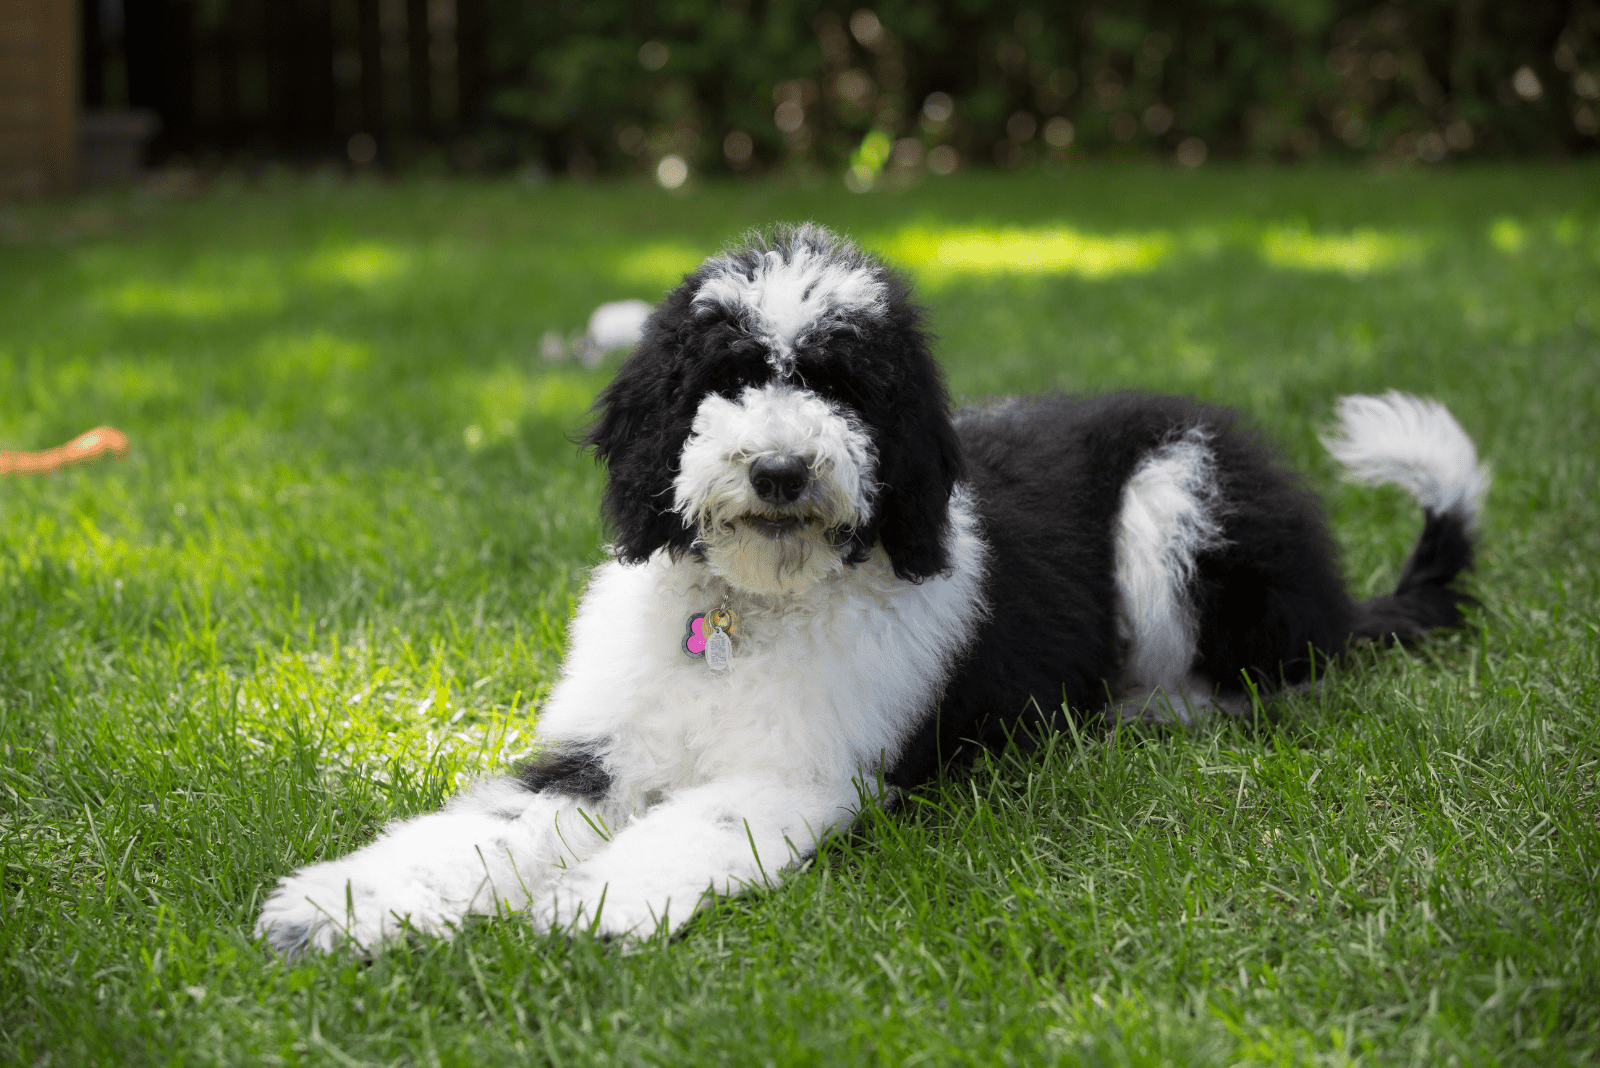 Sheepadoodle is lying down and resting